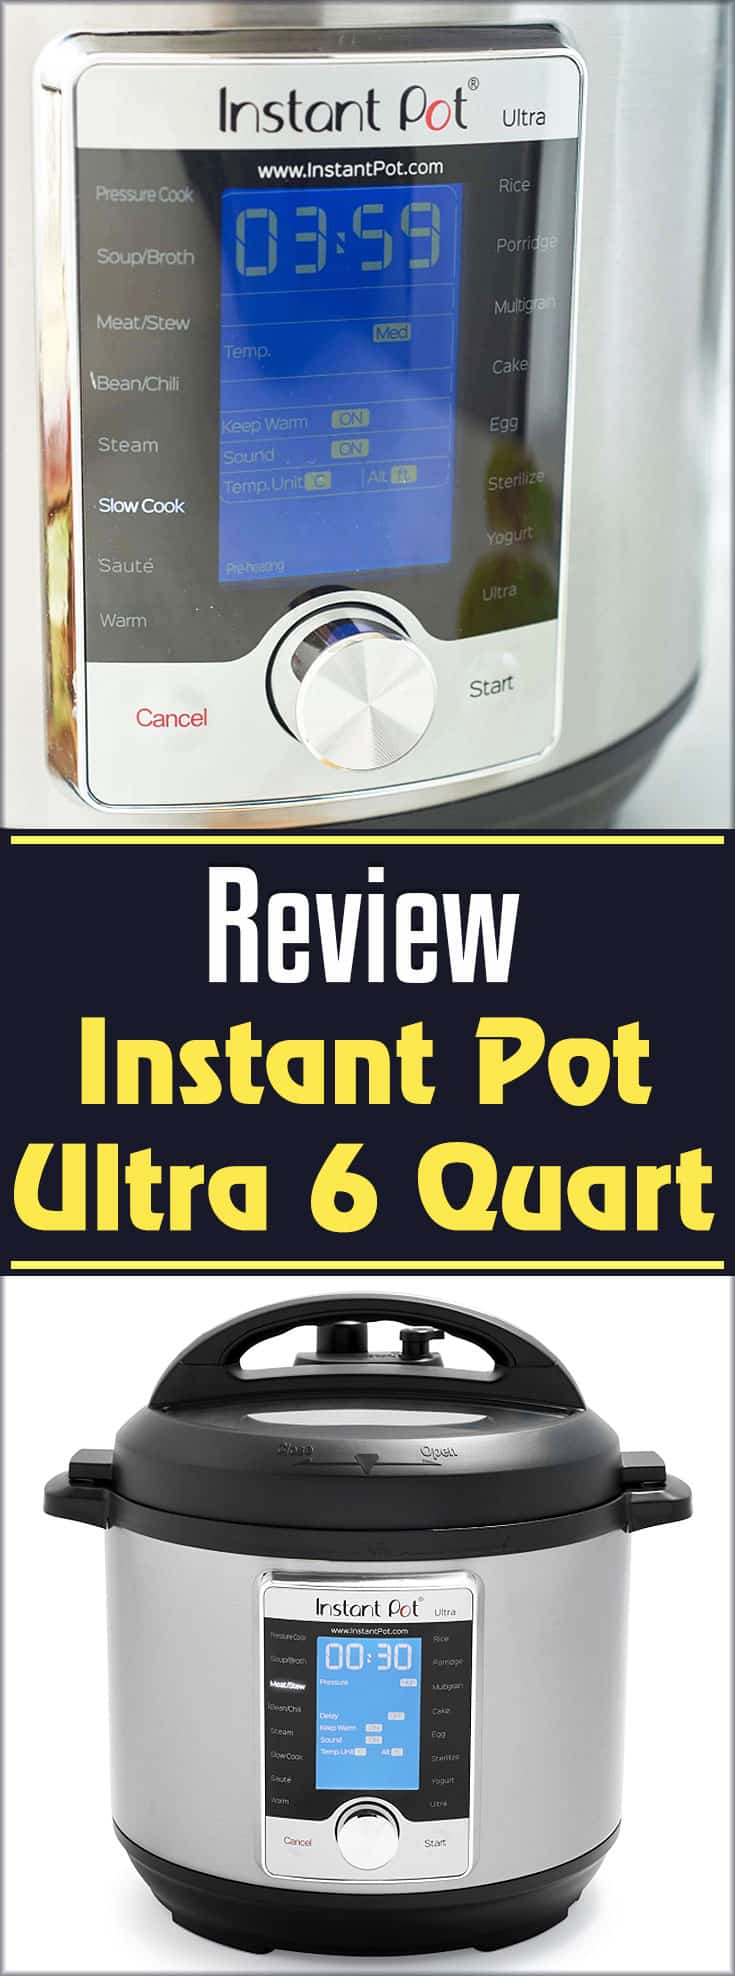 Get your Geek On! The Instant Pot Ultra 6 Quart Multi-Cooker